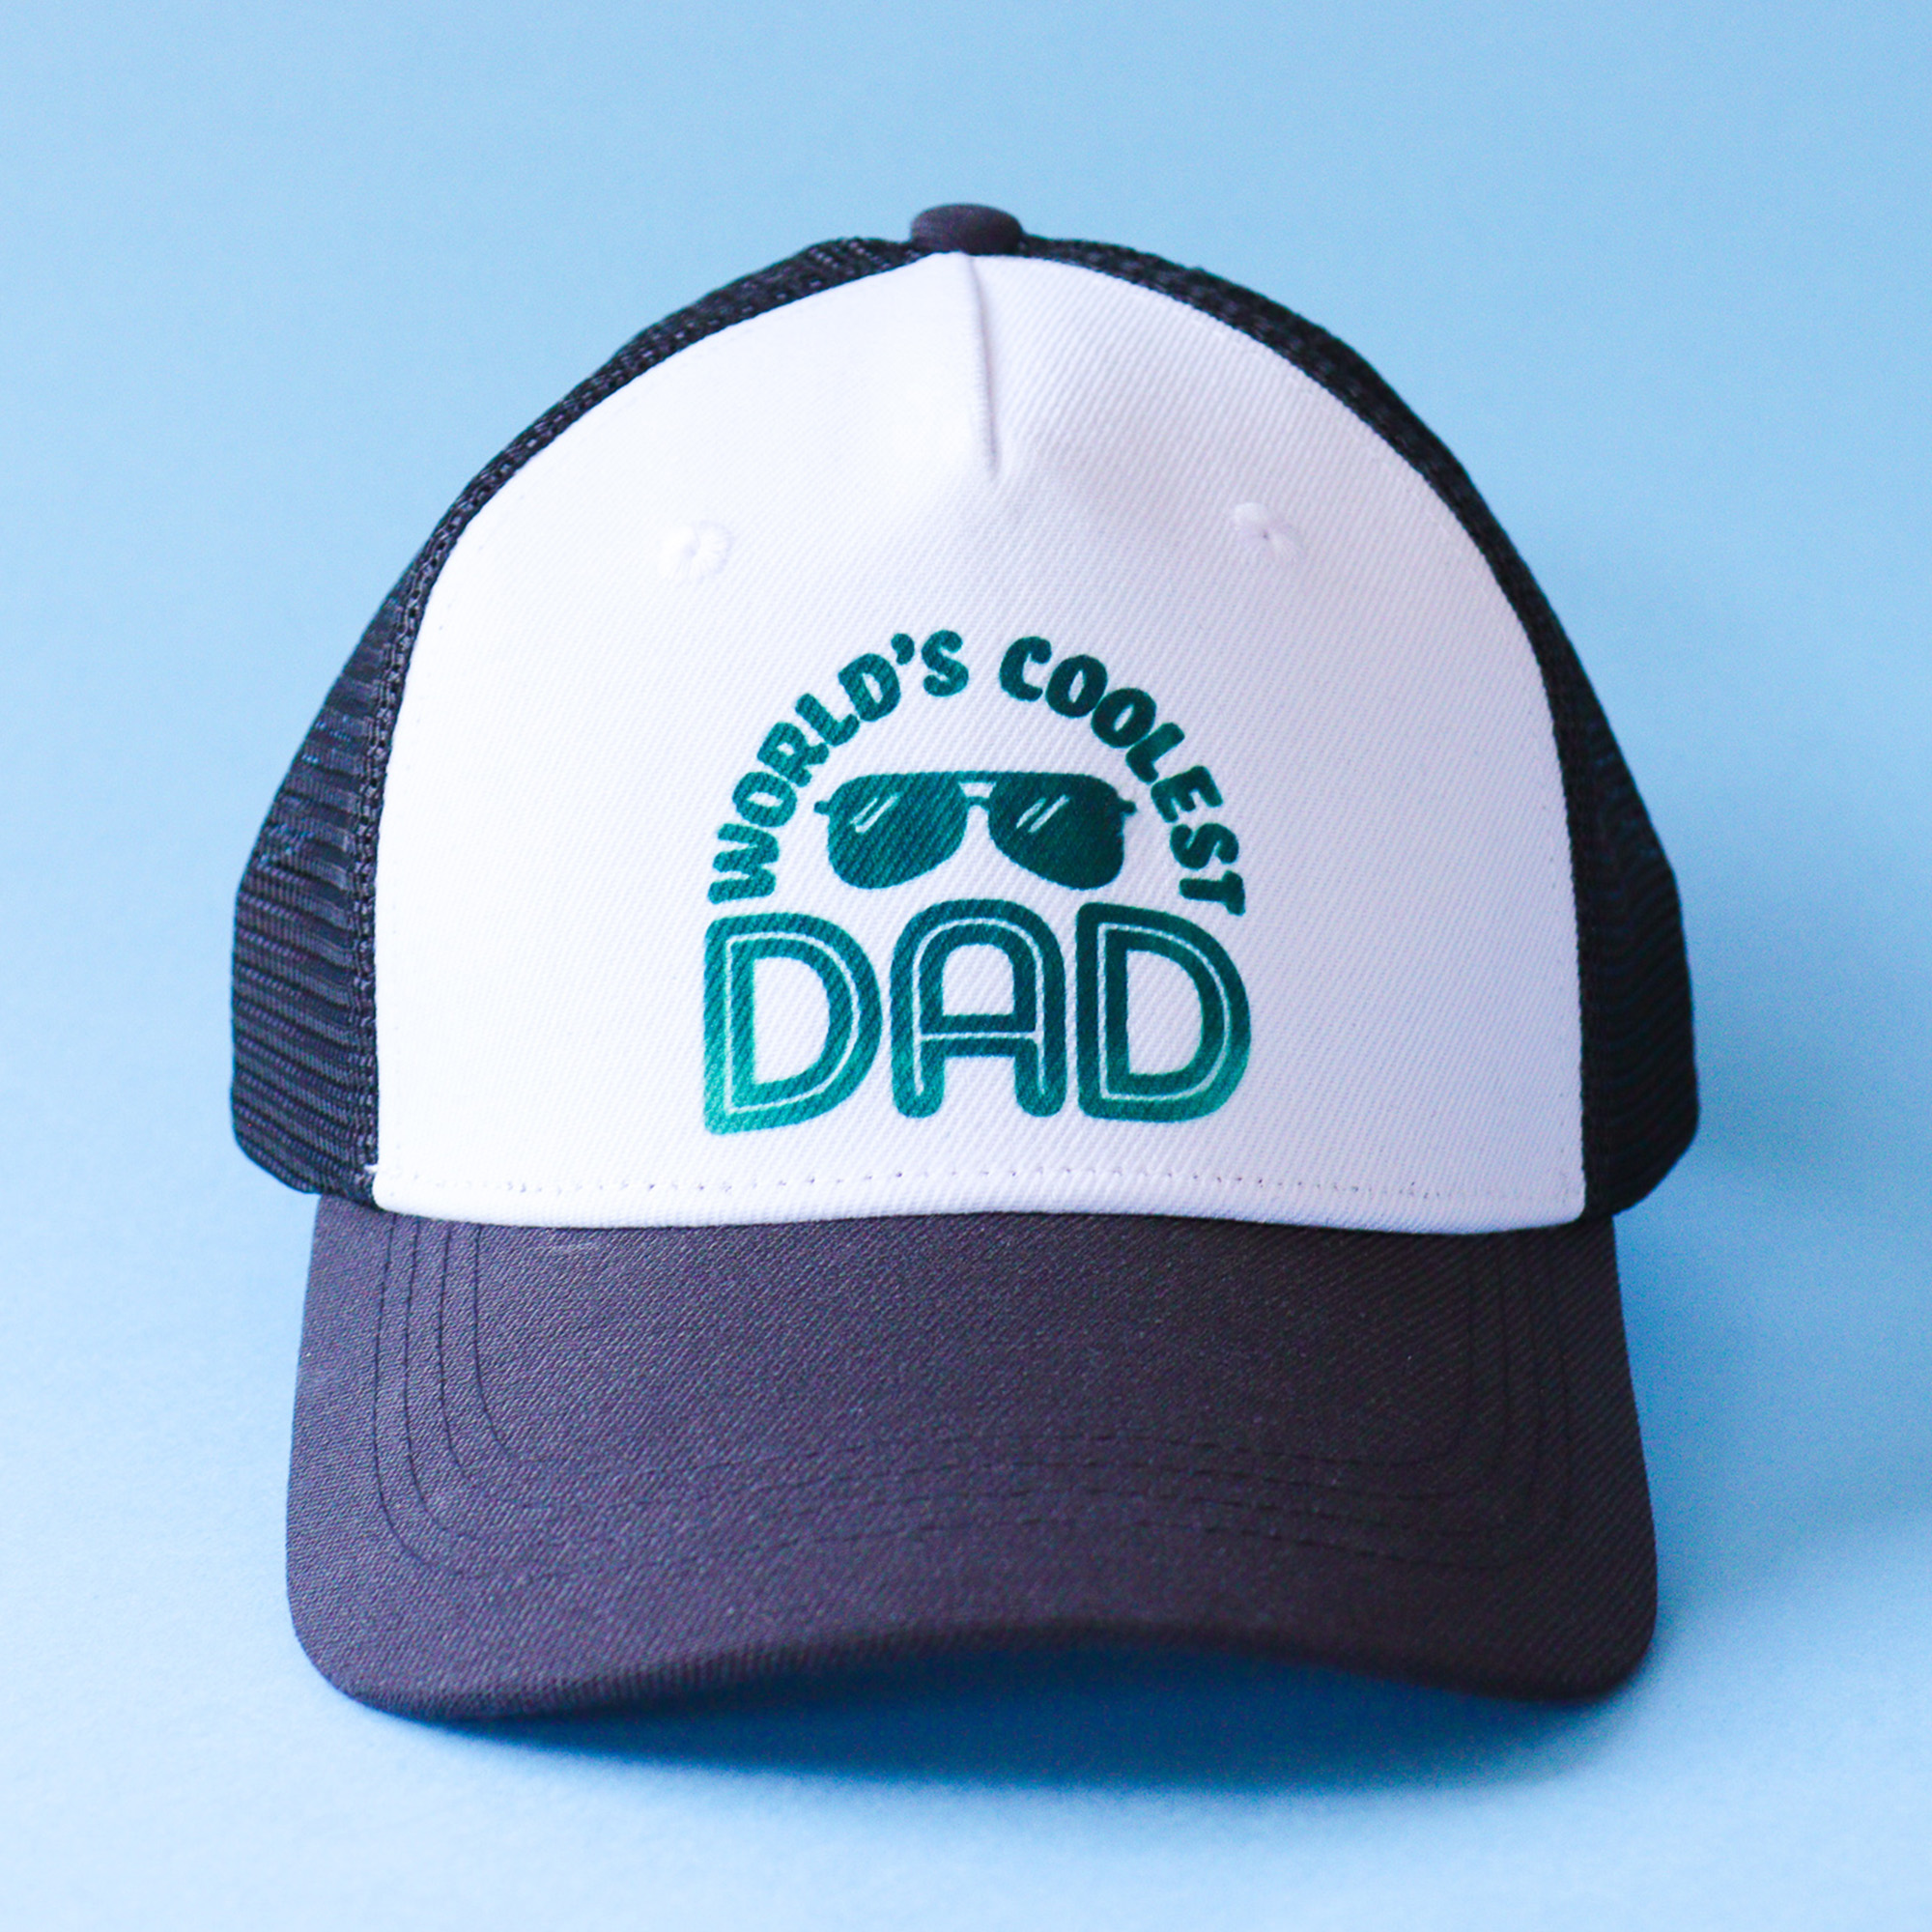 Cricut: How to Make a Father's Day Hat